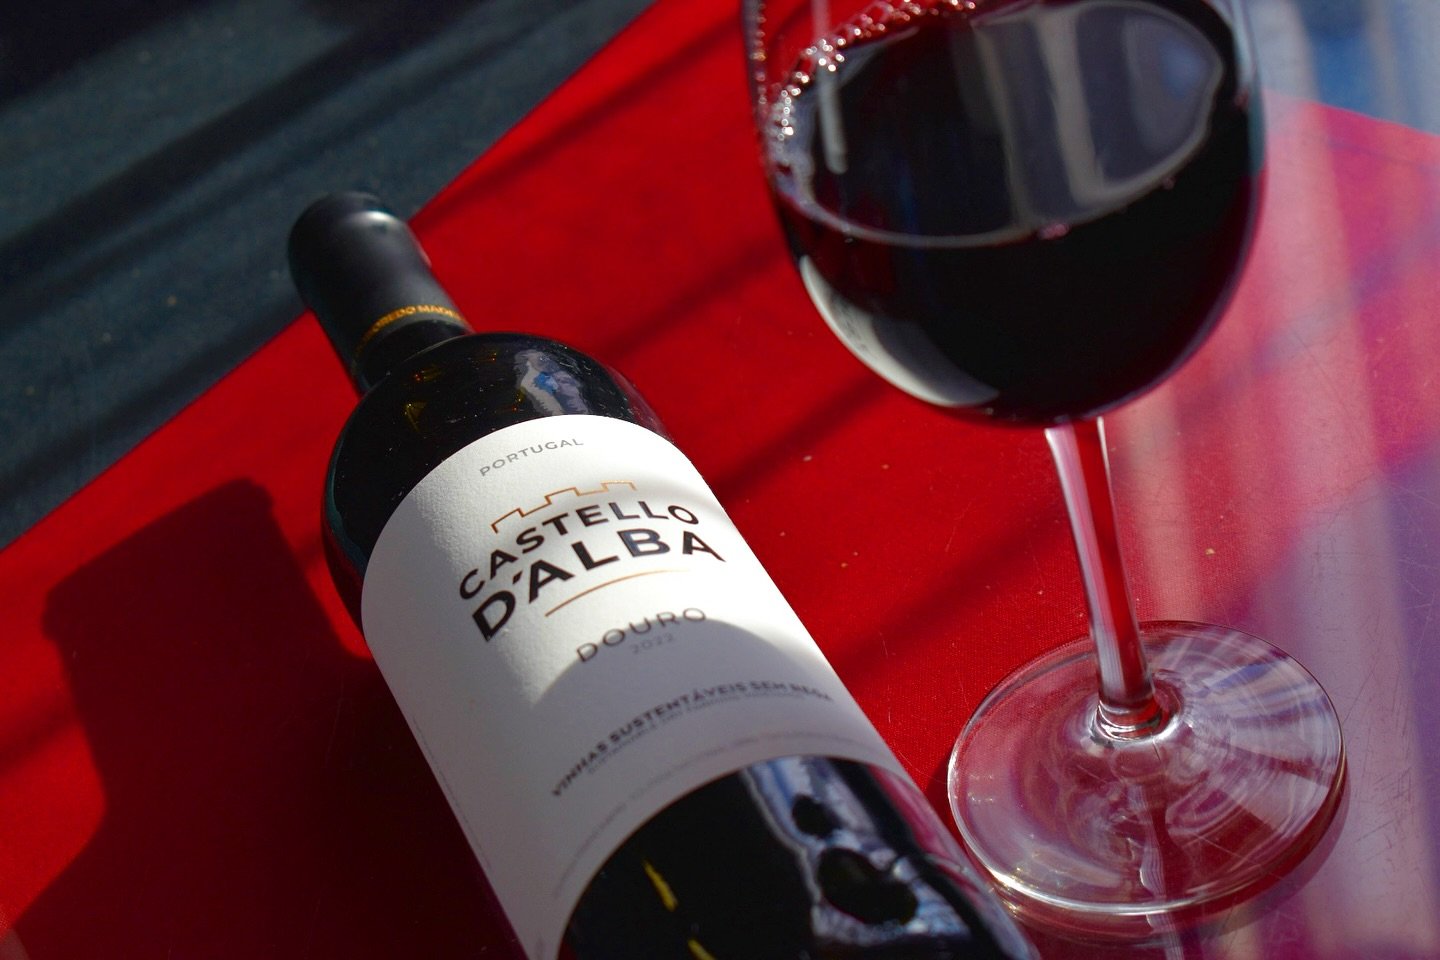 Wine down with us: Castello d&rsquo;Alba Red🍷🇵🇹 This wine is produced in Rui Robredo Madeira&rsquo;s winery in Sar Joao da Pesqueira, from a selection of grapes from the best vineyards in the Upper Douro 🫶🏼 

Notes: Sweet hints of rock rose, flo